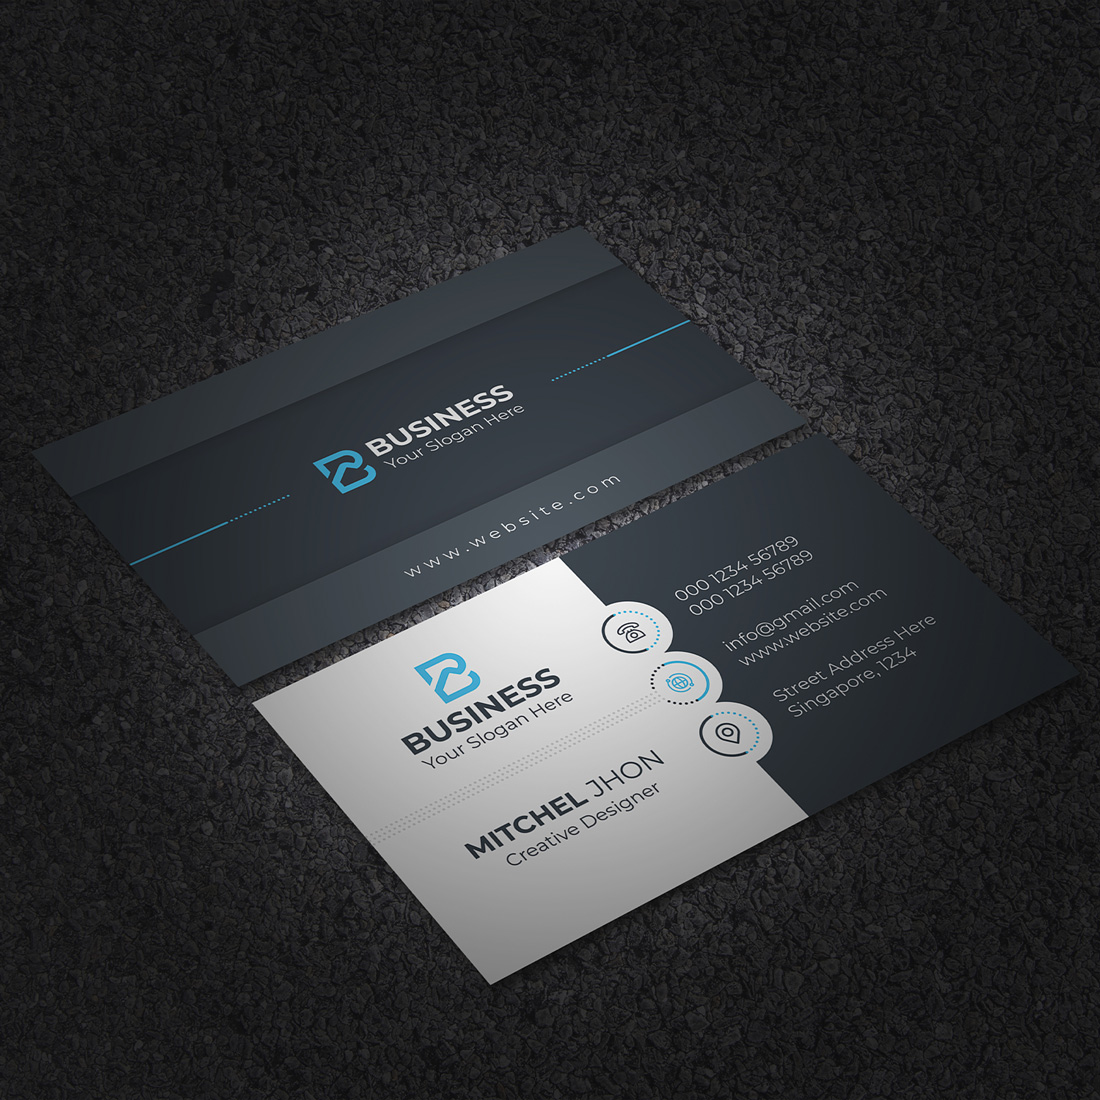 Business Card Template Only $6 in the dark with blue logo.